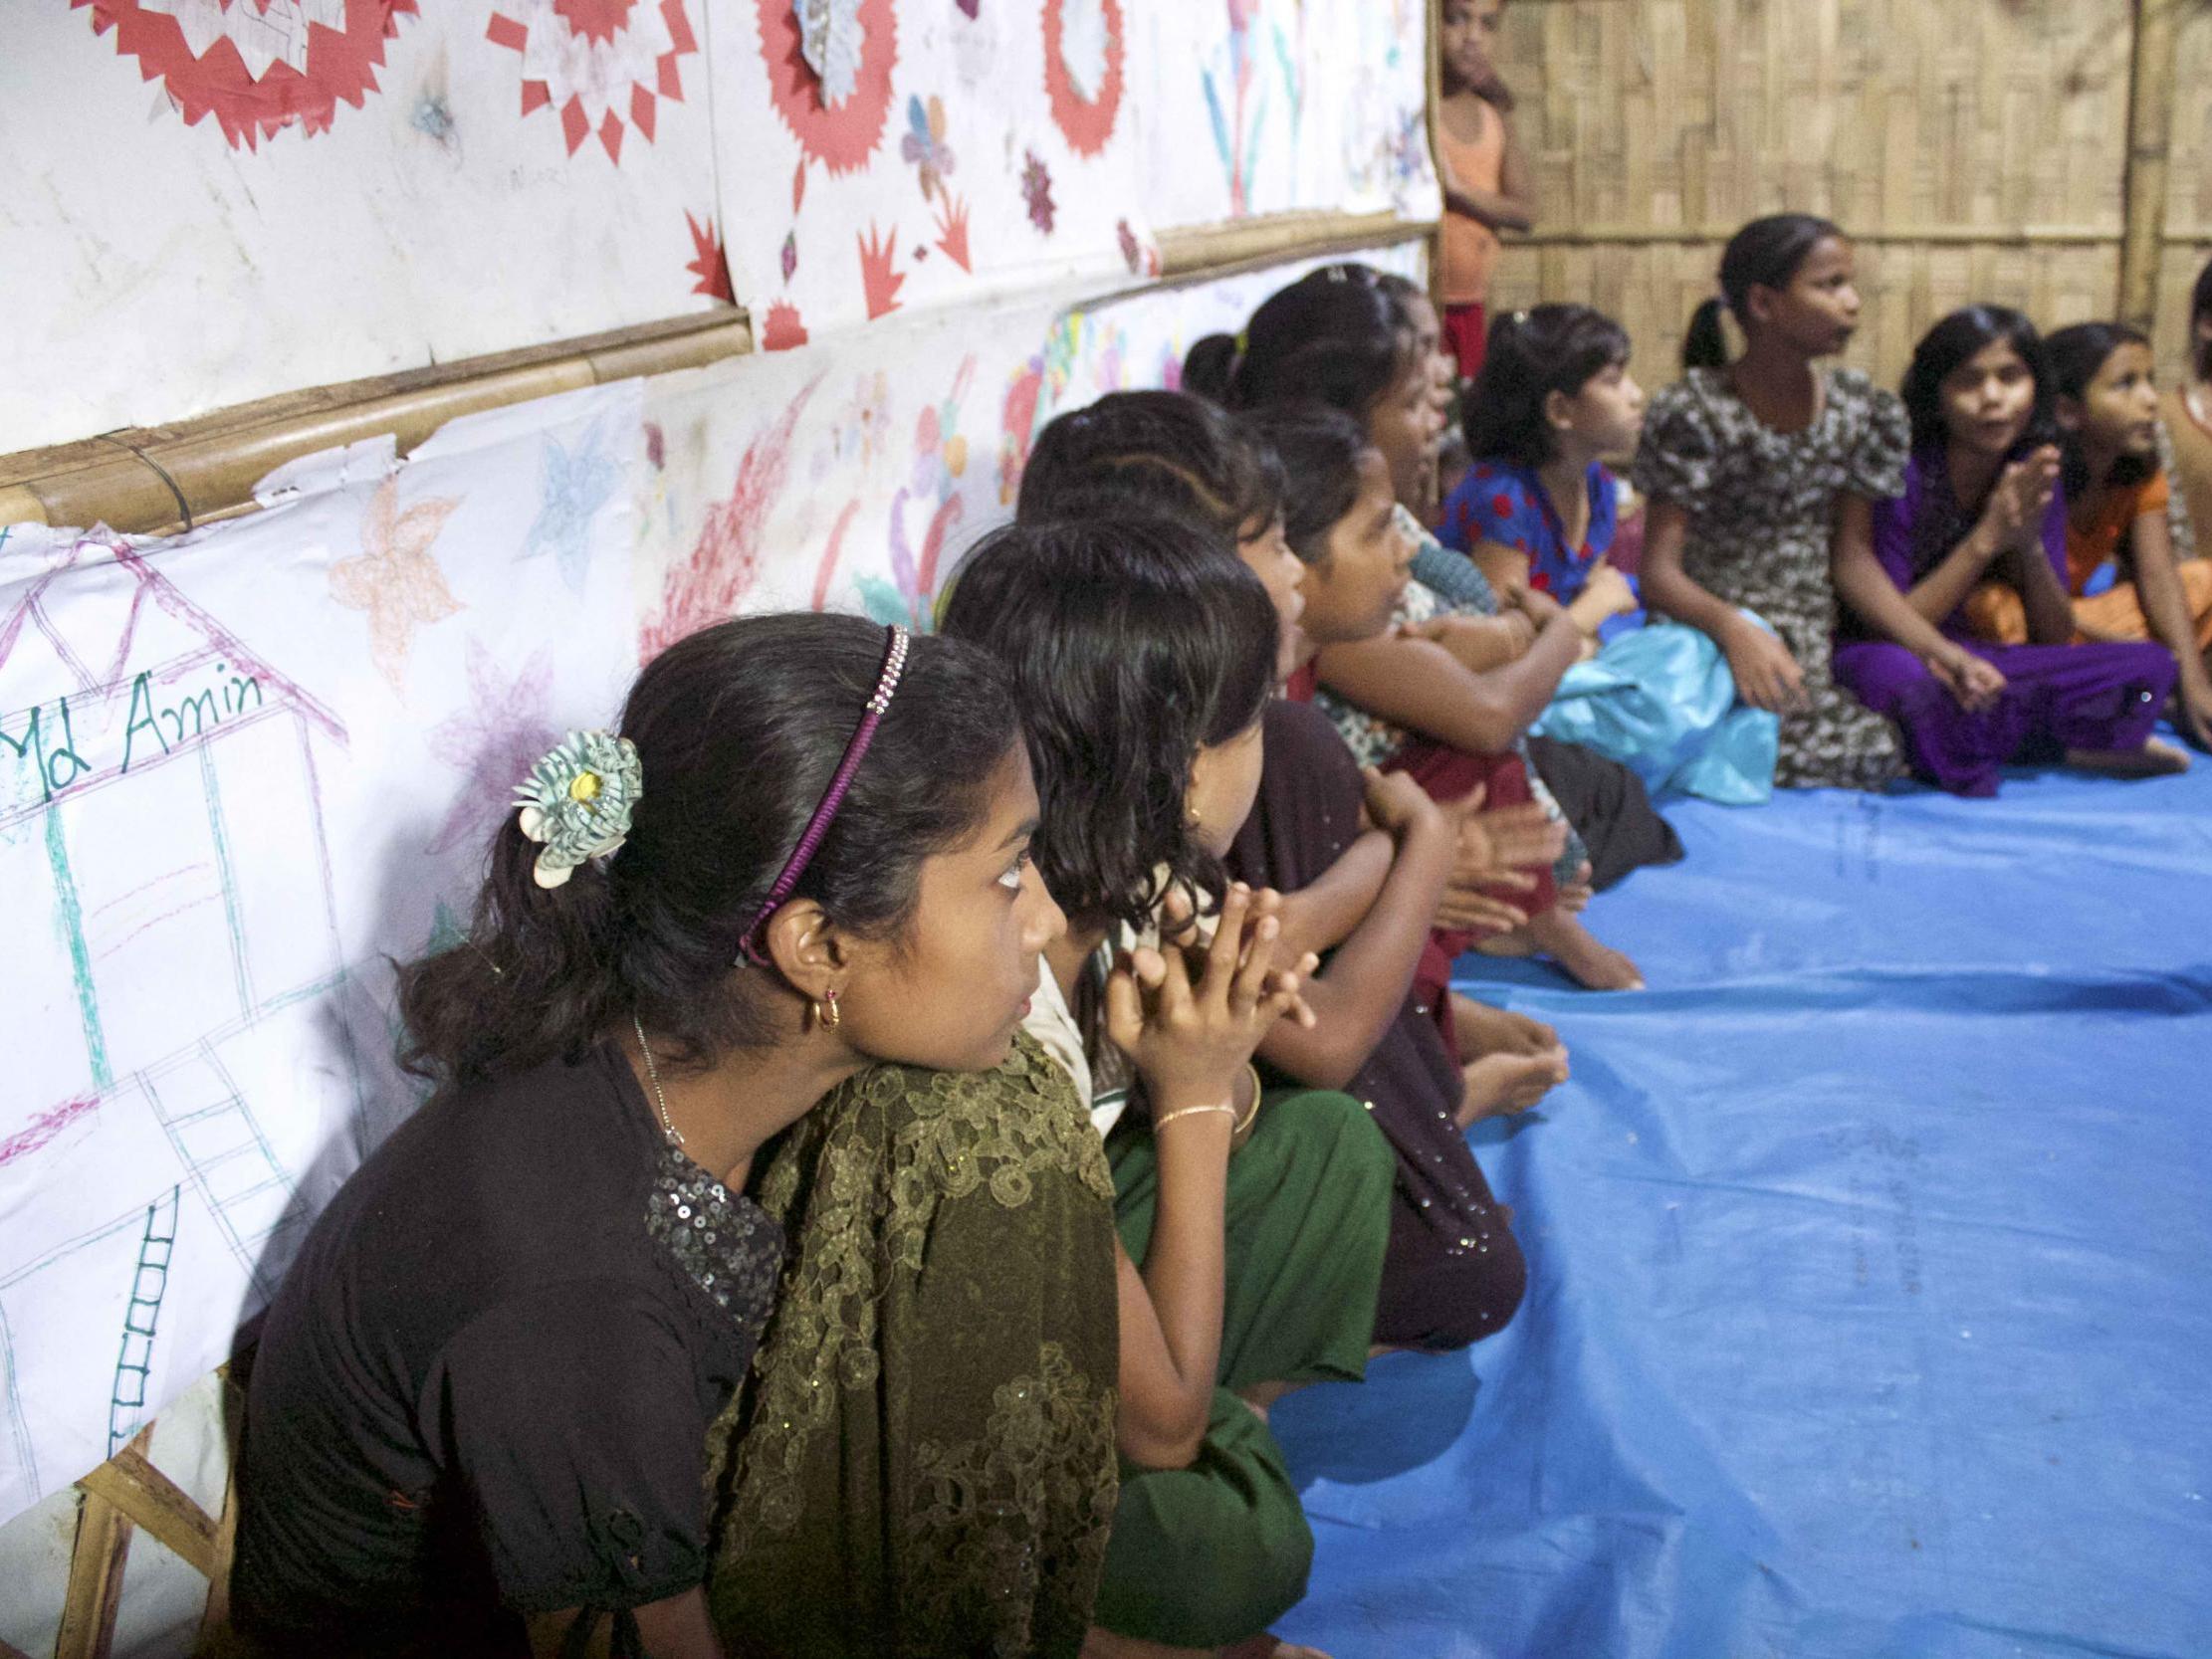 Children over age 12 are taught about forced marriage, sexual consent and other social issues at daily clubs run by Unicef in the refugee camps outside Cox’s Bazar, Bangladesh